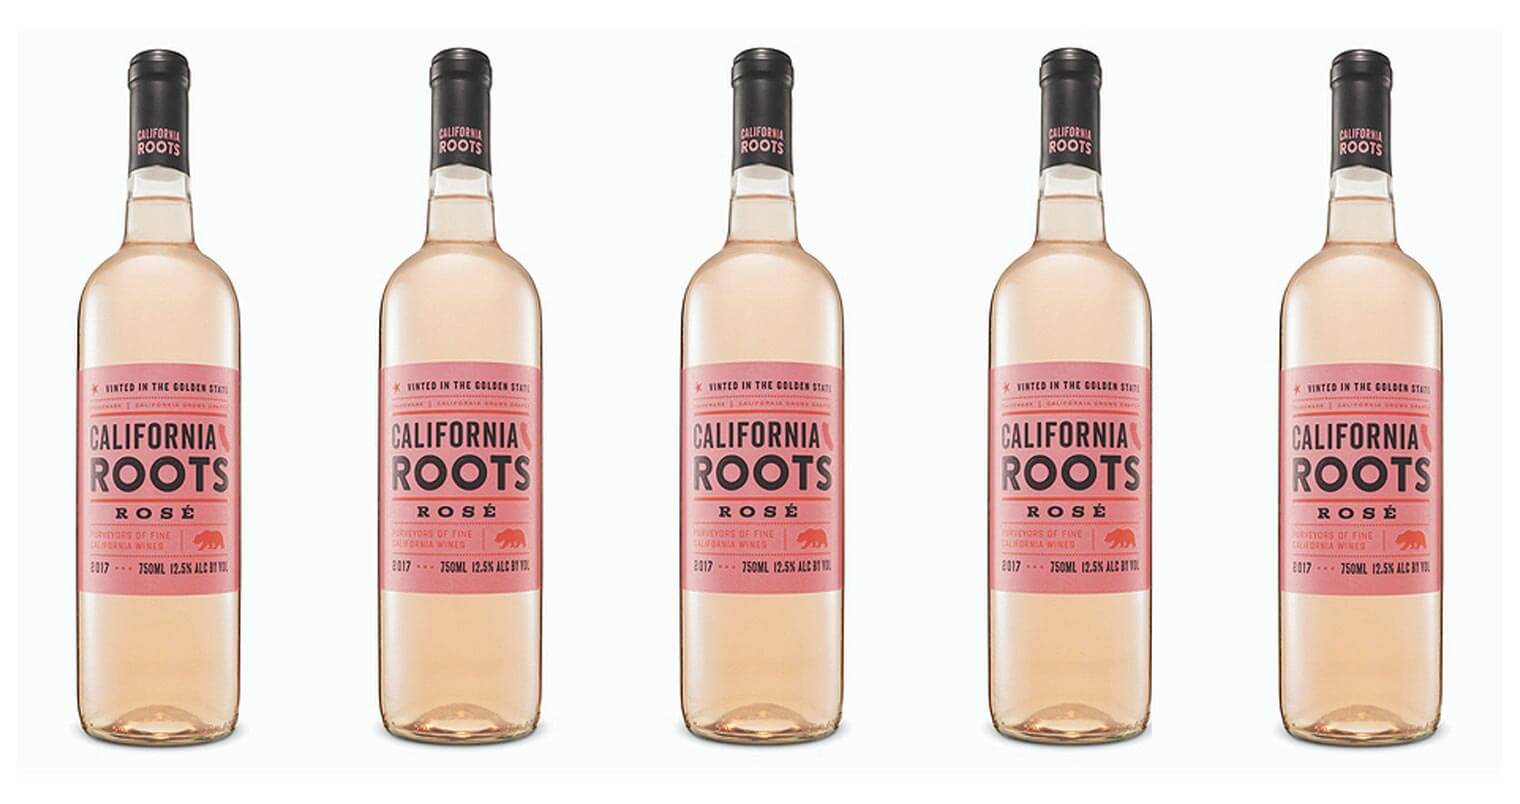 California Roots Rosé, bottles on white, featured image